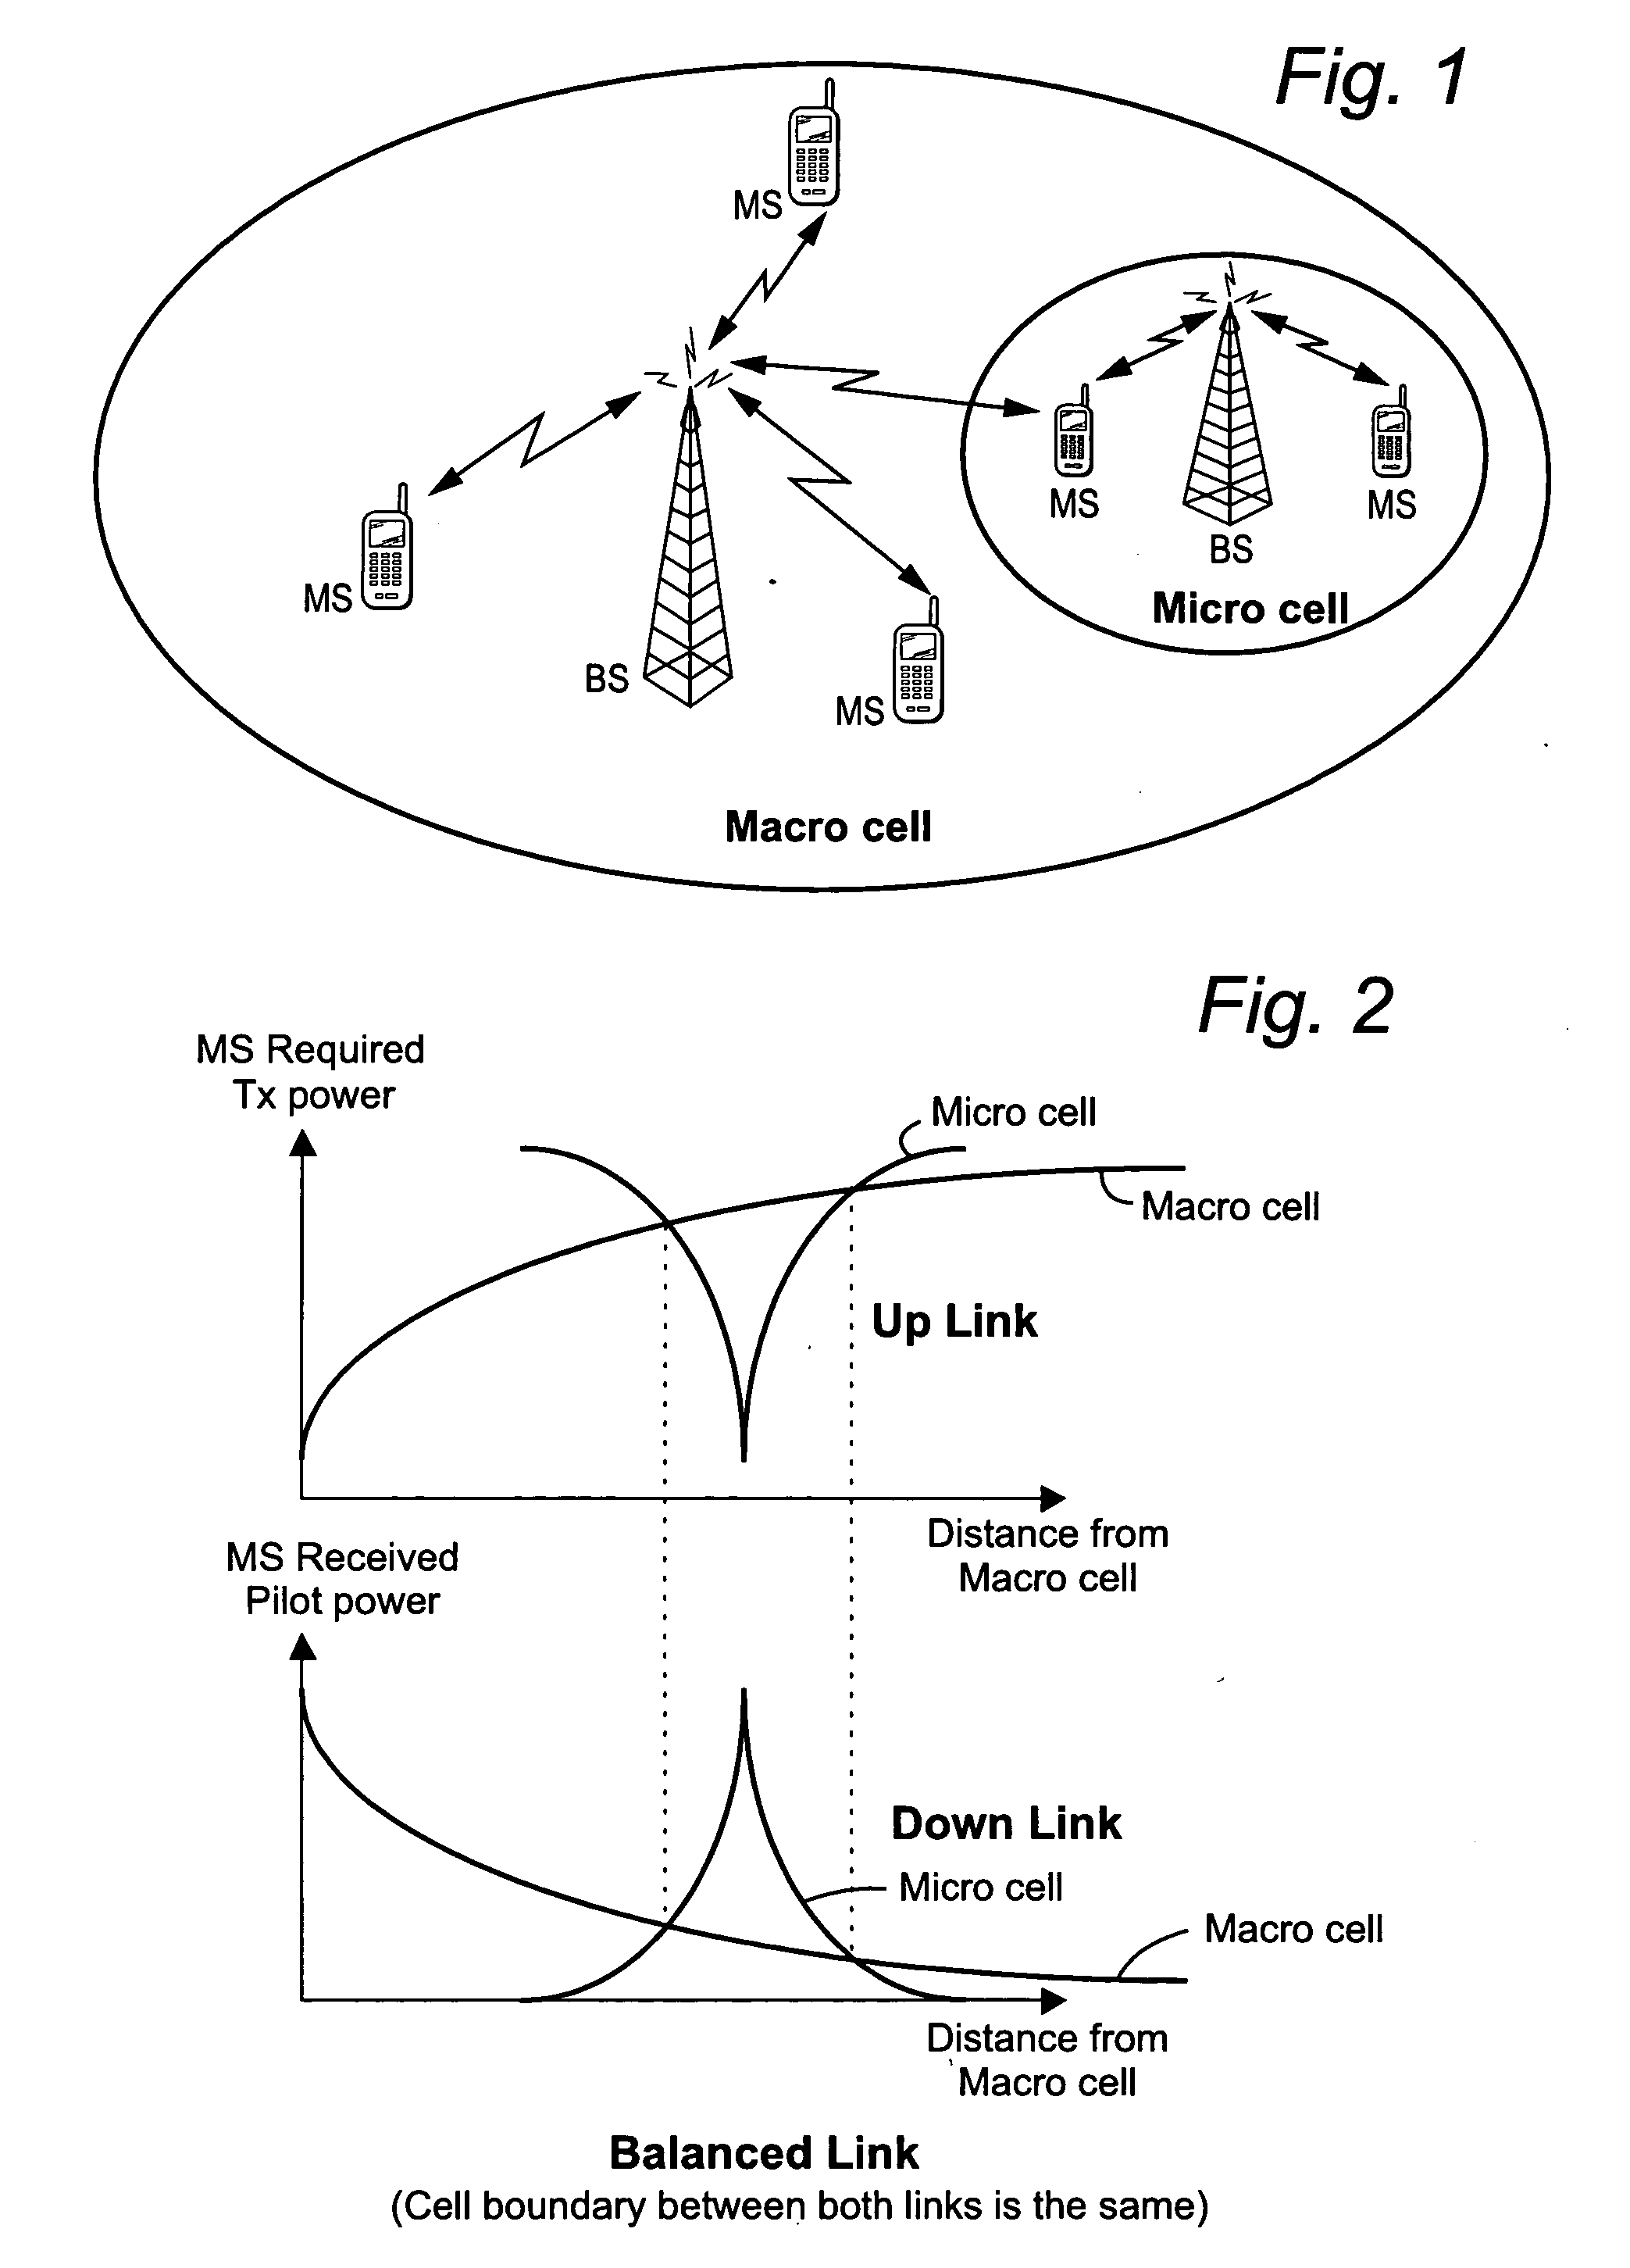 Mobile communications in a hierarchical cell structure